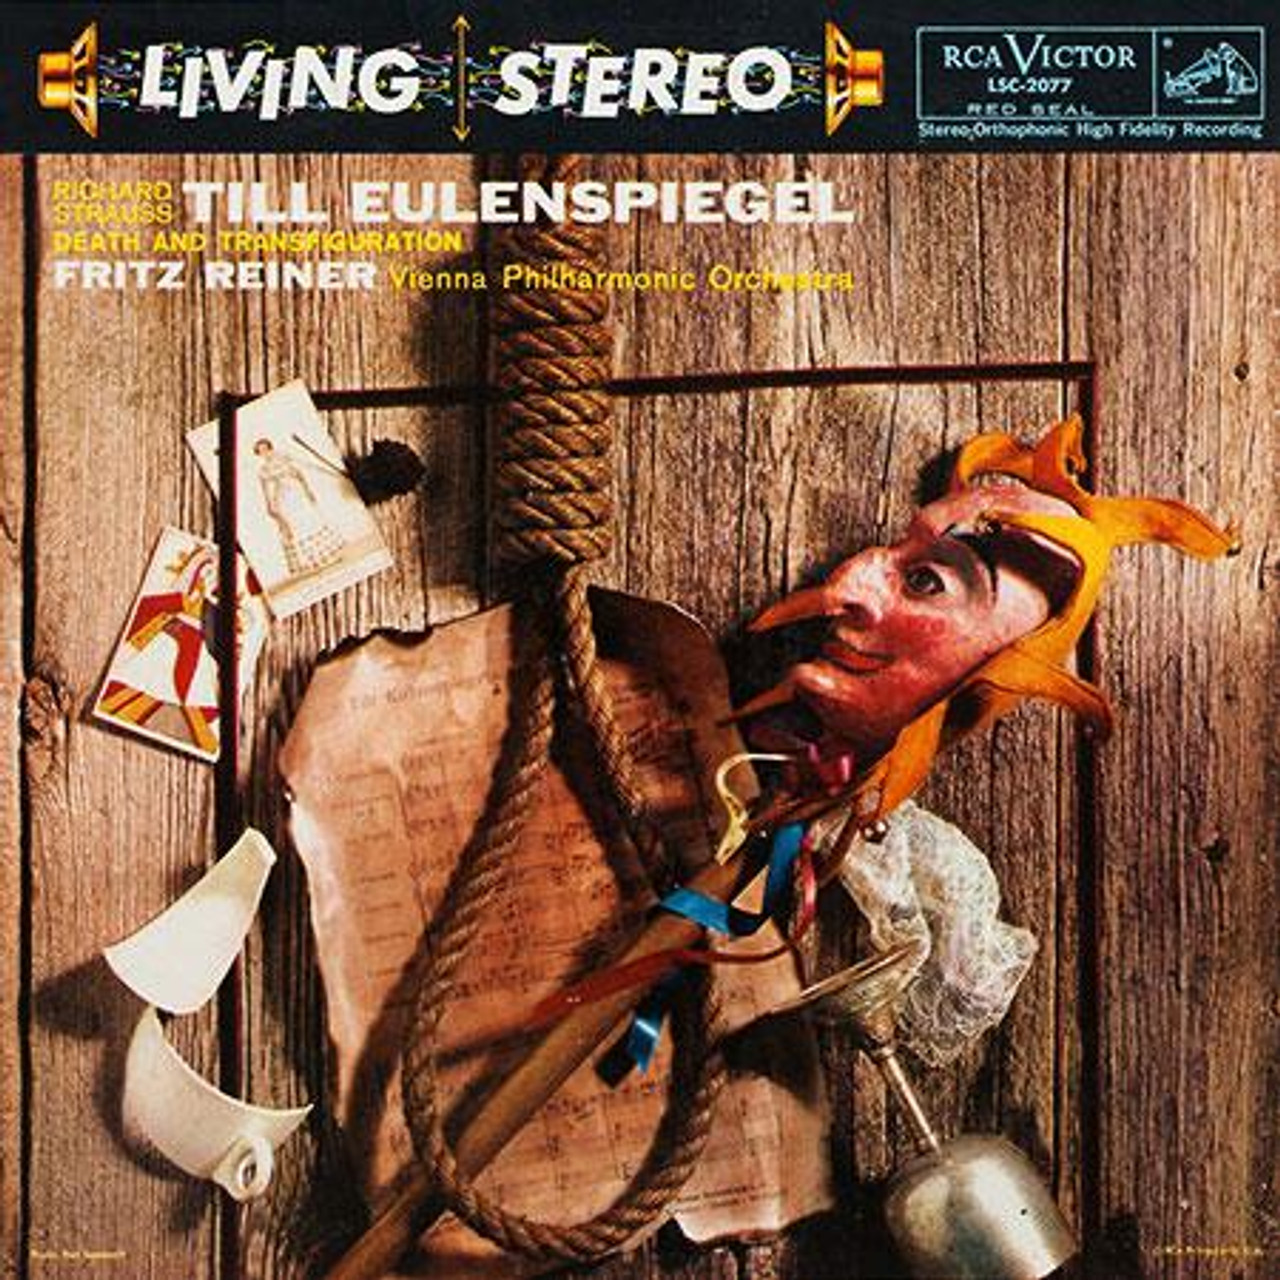 LIVING STEREO THE REMASTERED 60CDsクラシック